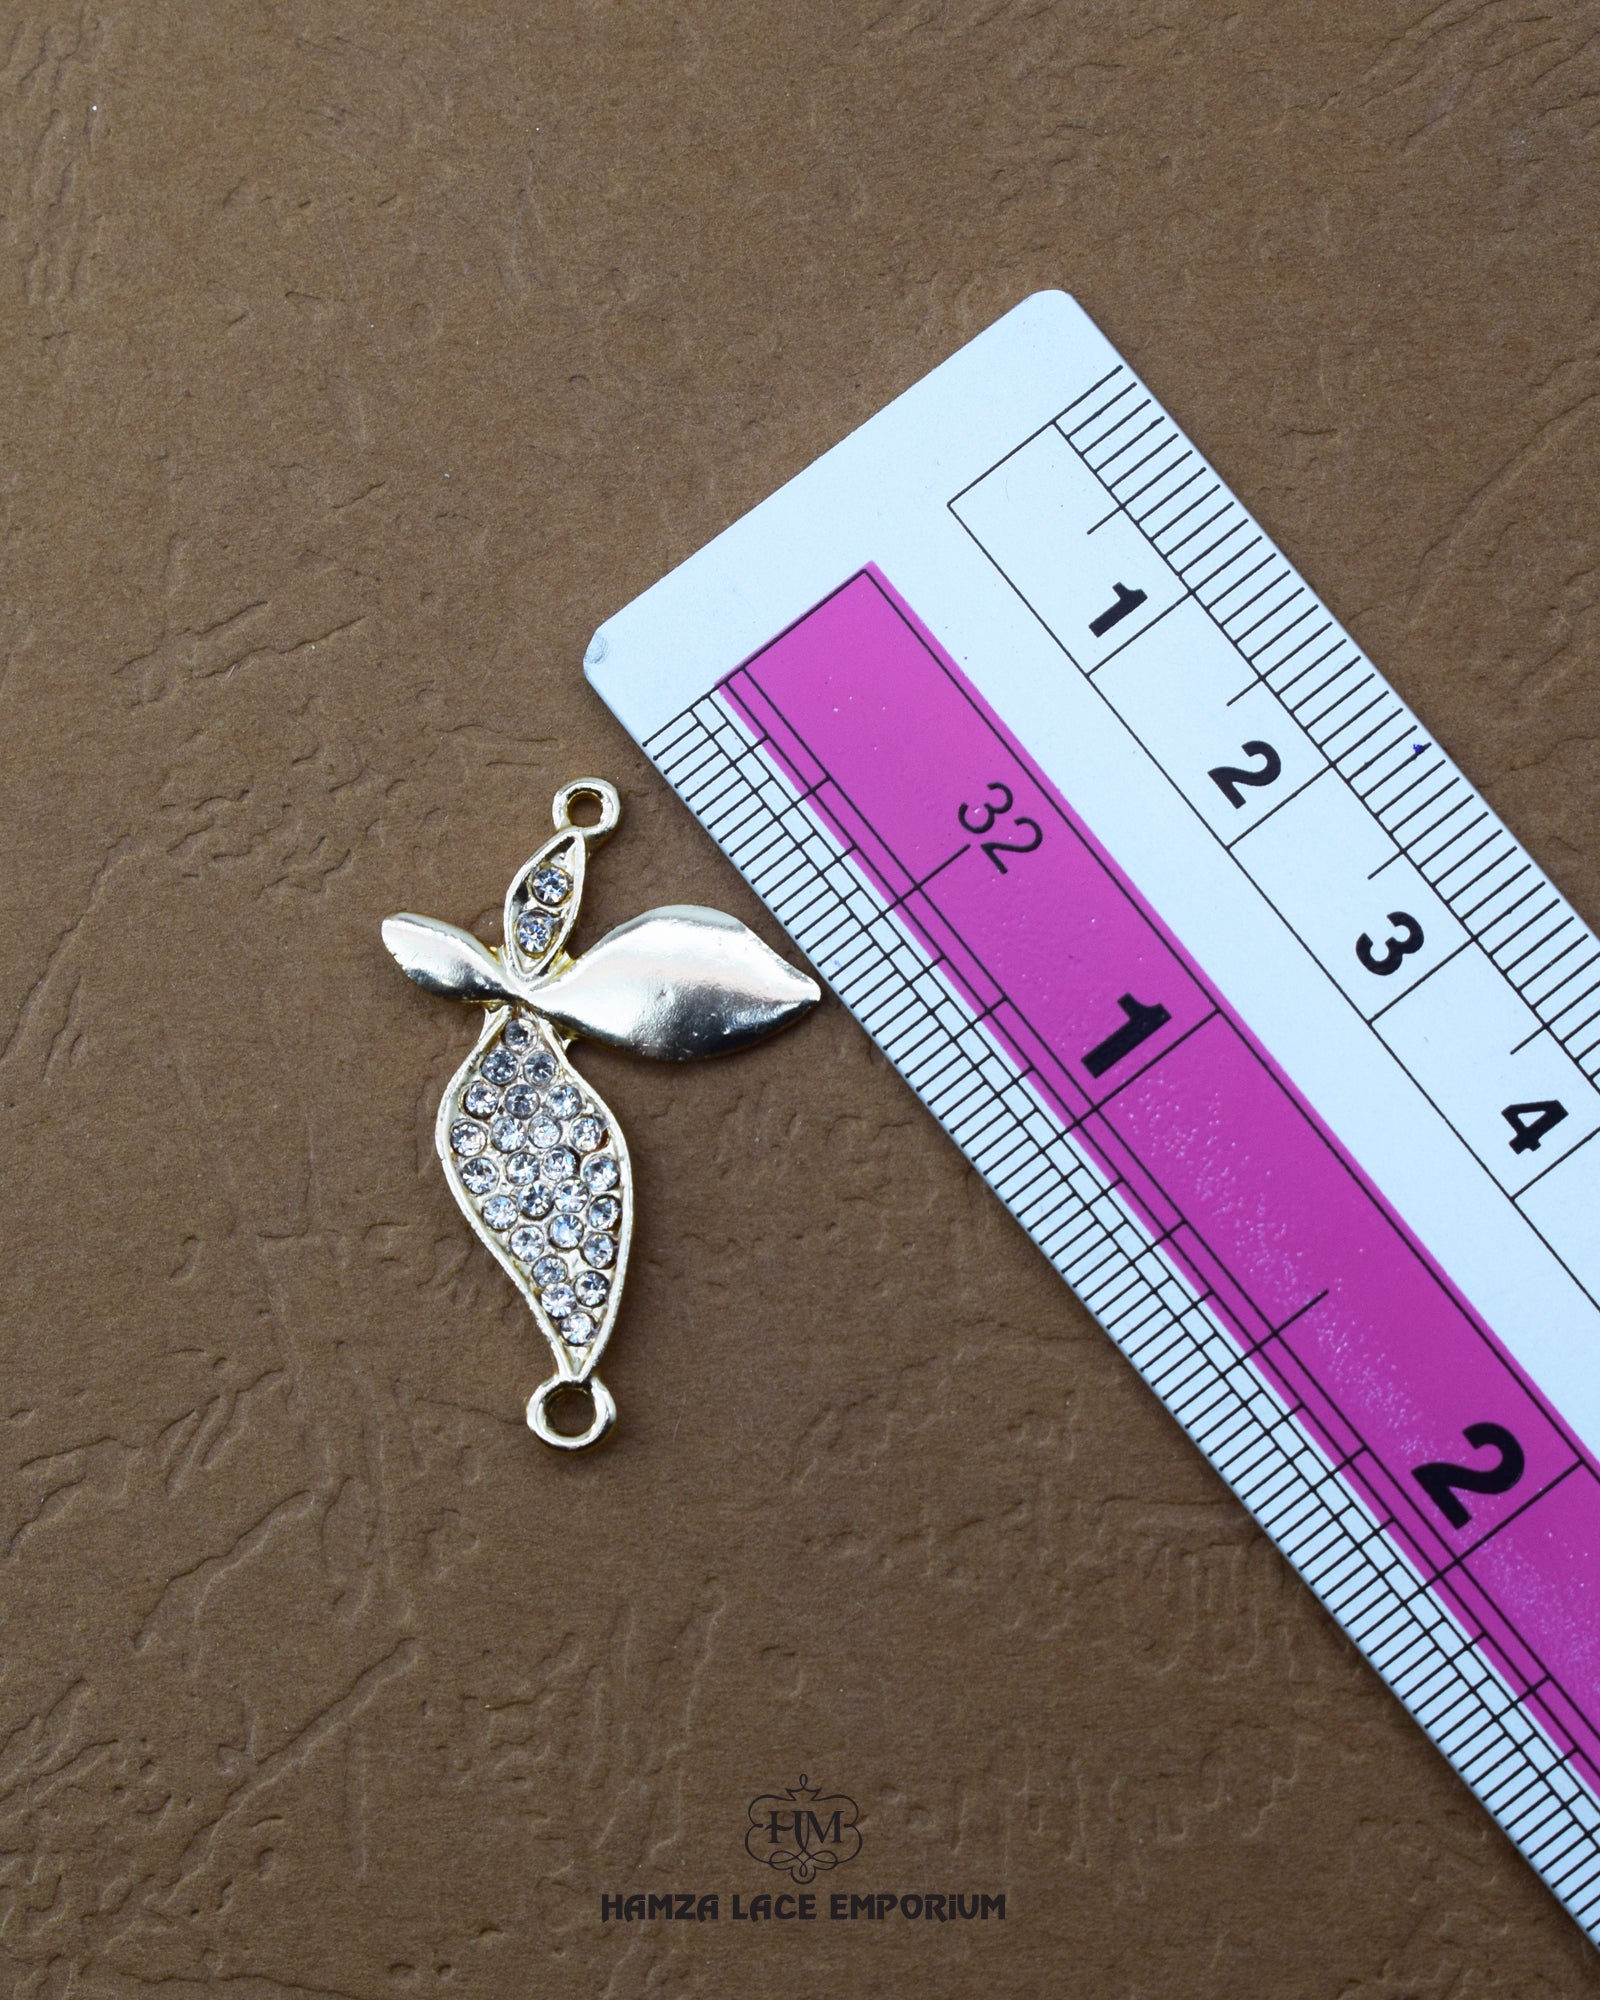 'Hanging Button 231FBC' with ruler for size reference in the product image.